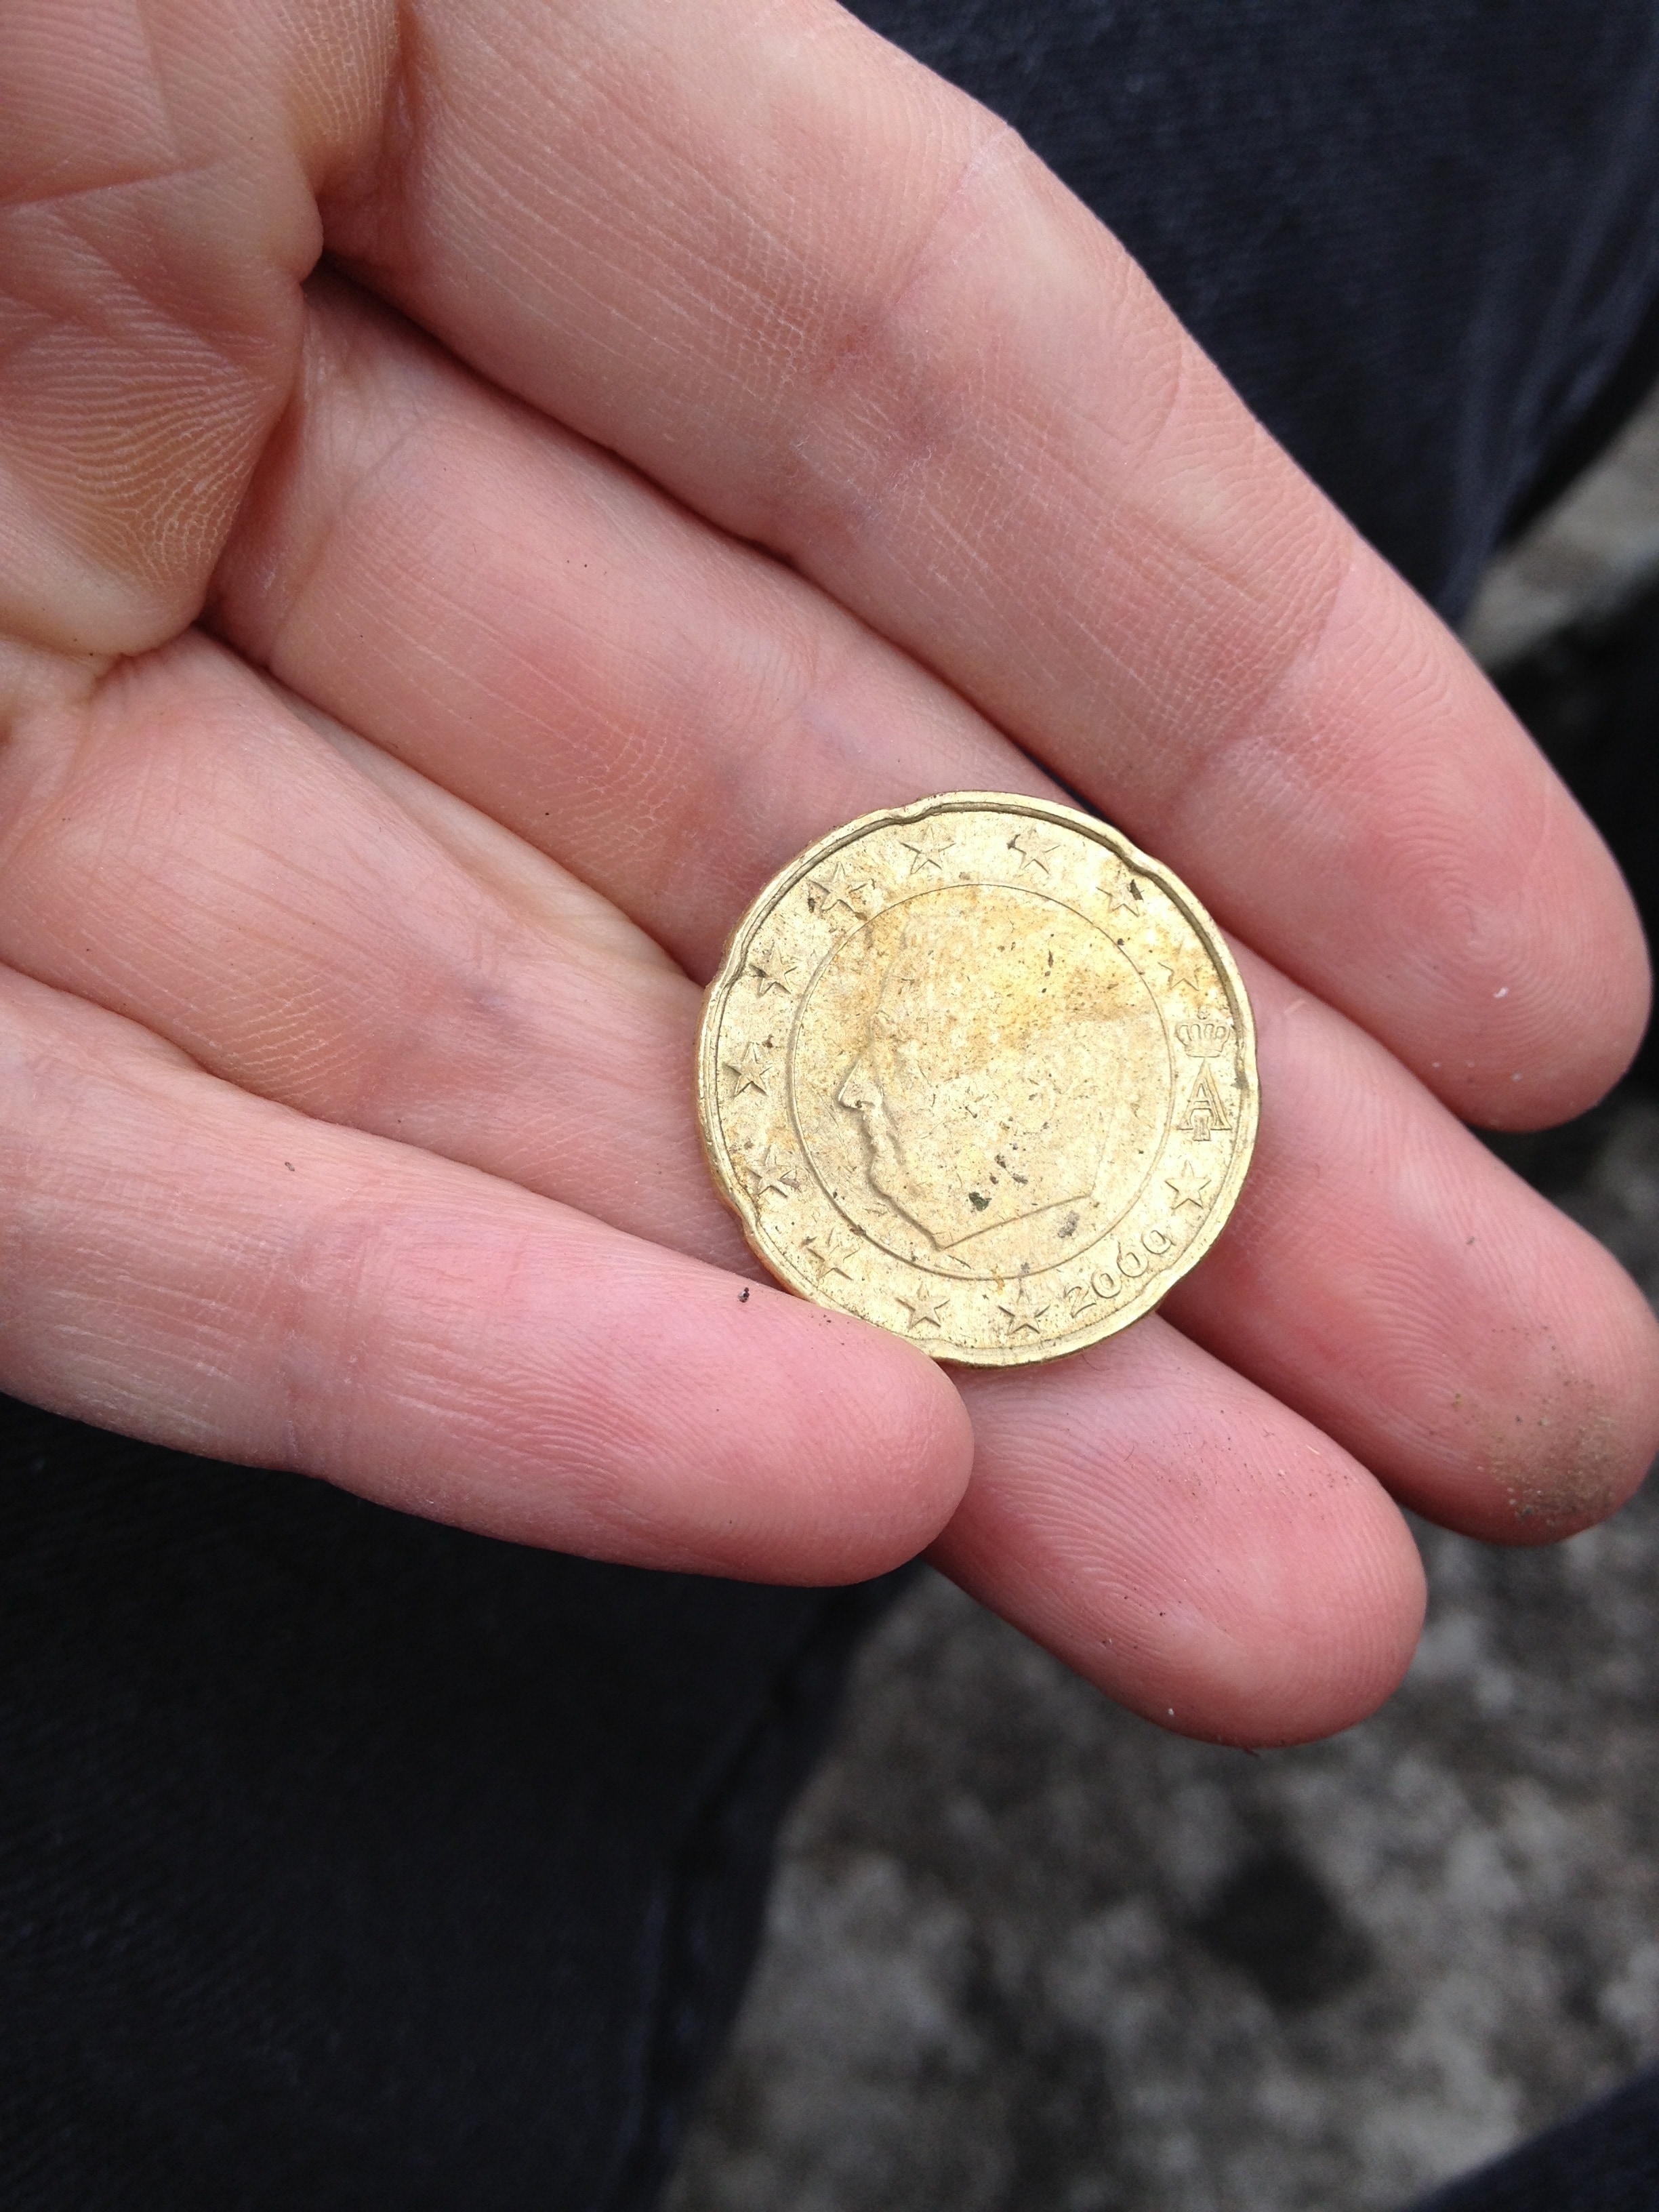 person holding round coin